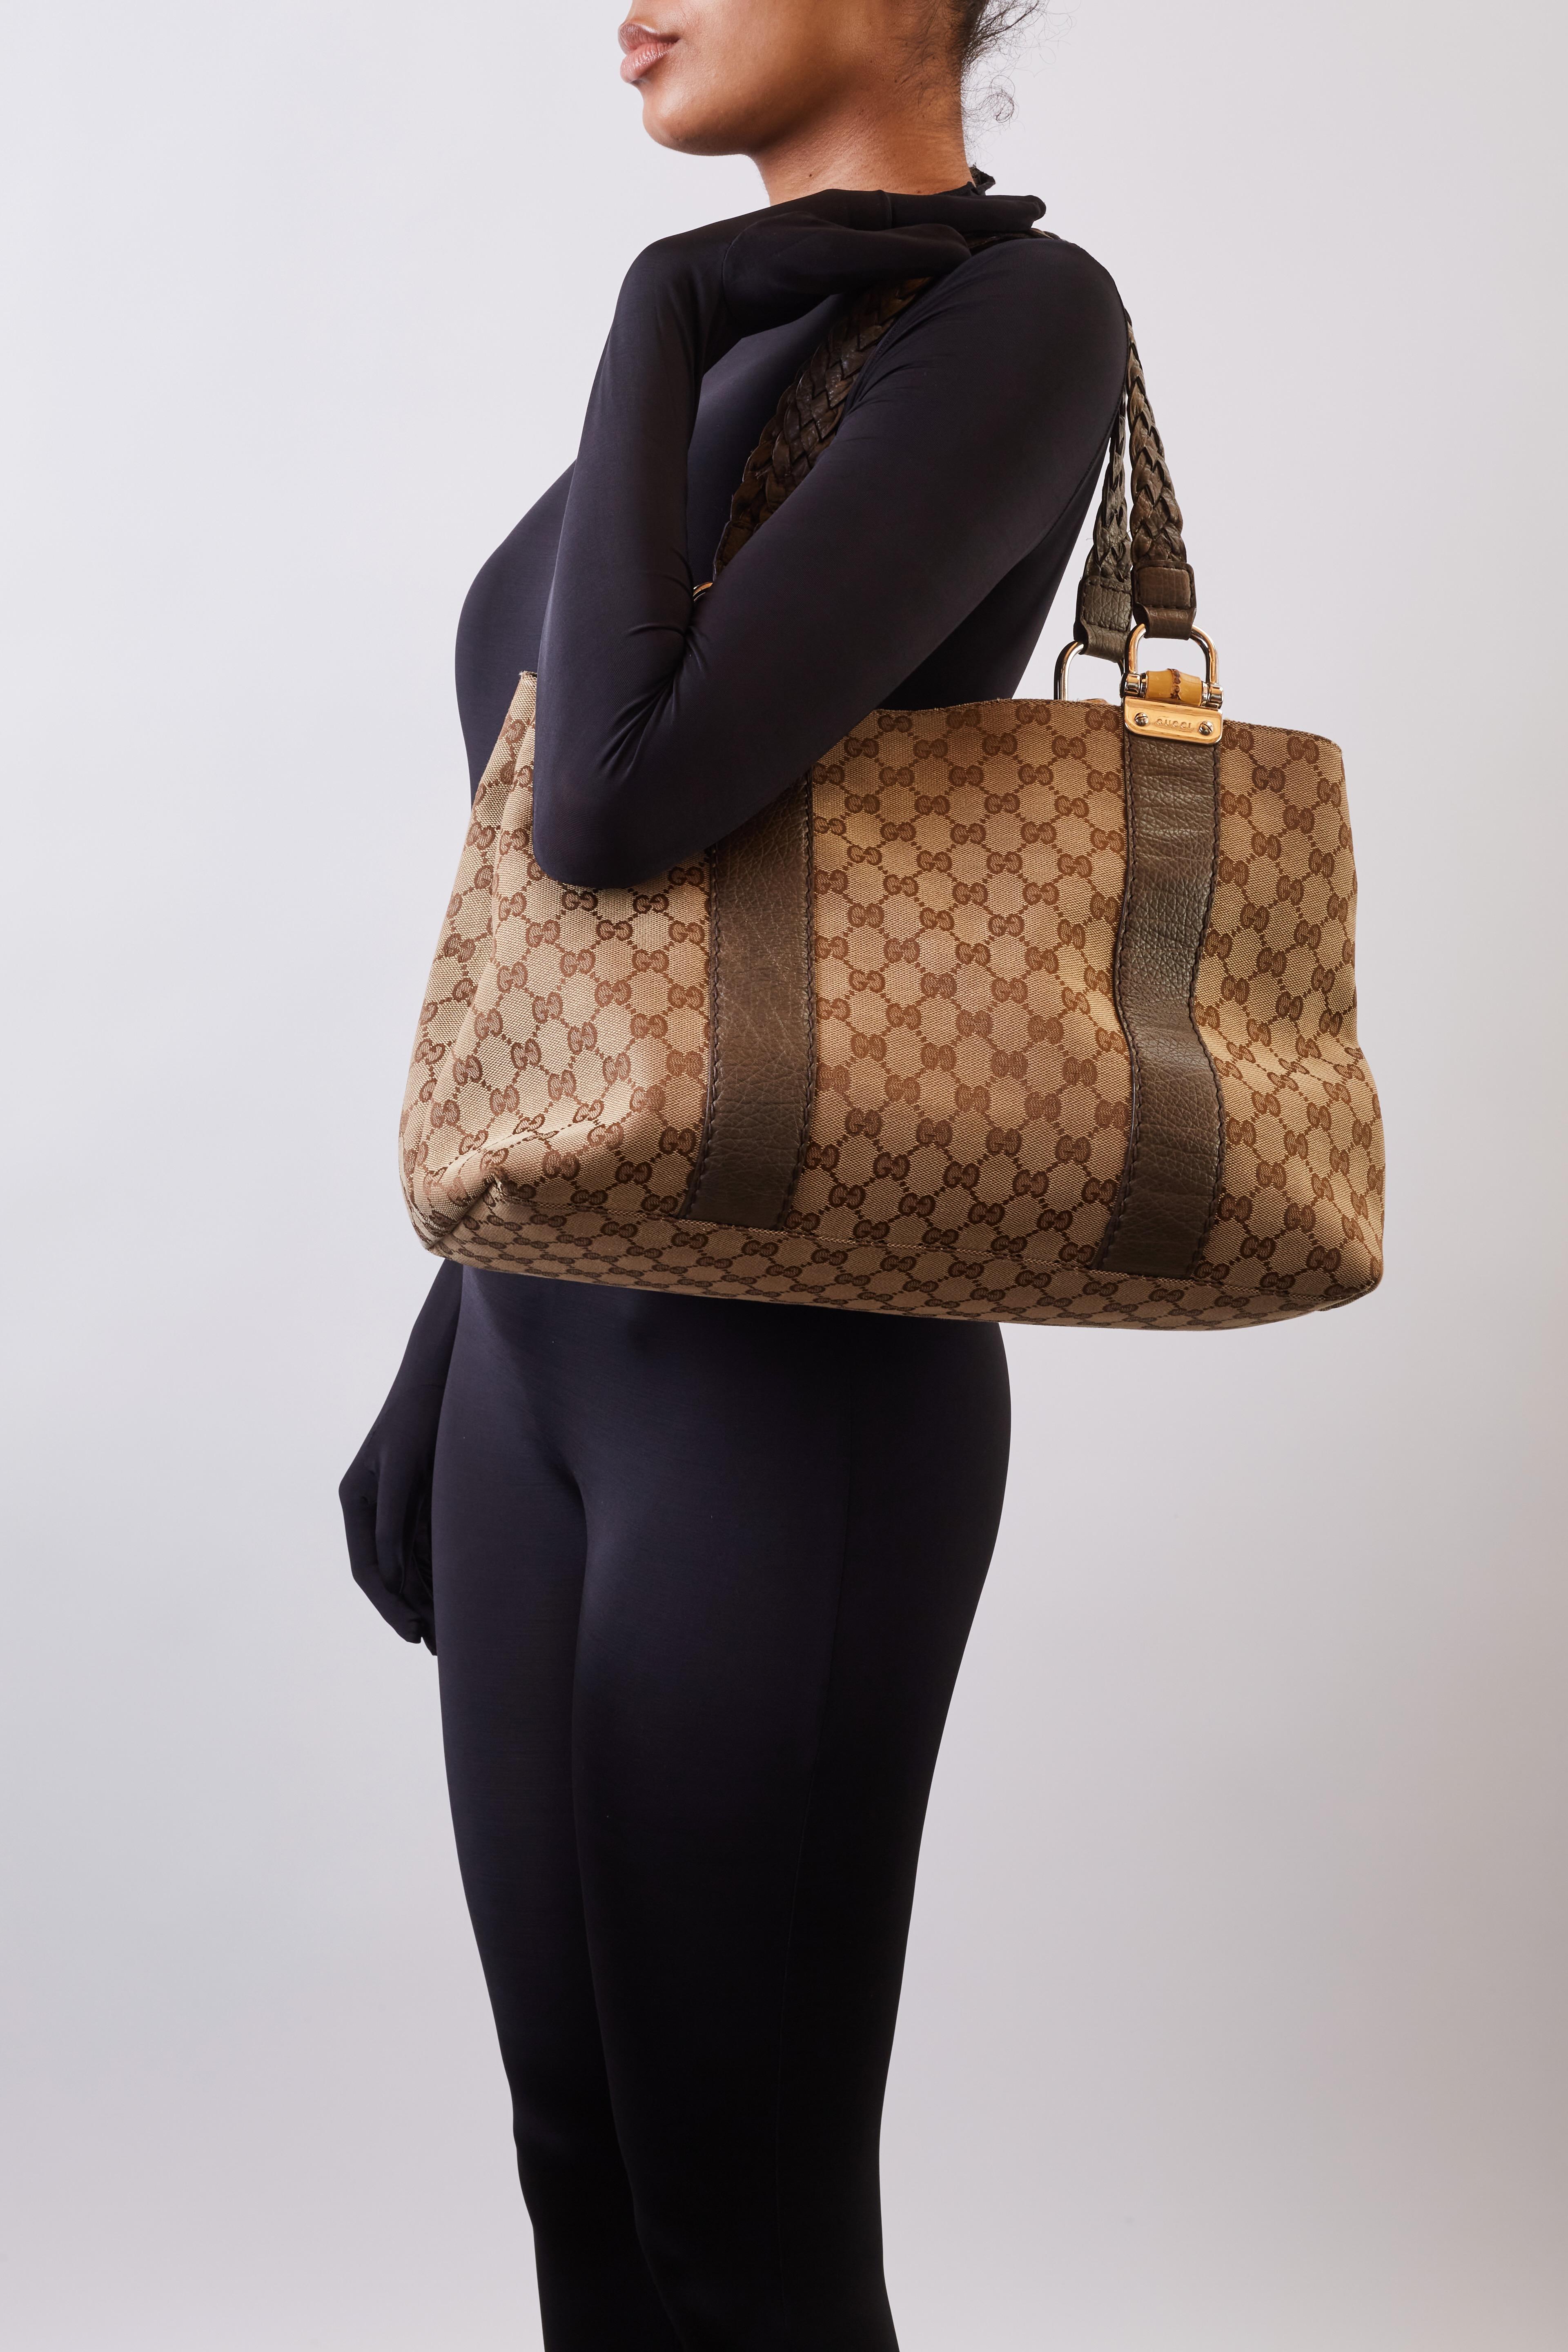 This tote bag is made of Gucci GG monogram canvas with complimentary olive green leather finishes. The bag features dual braided leather strap top handles, silver links with a bamboo rod embellishment at strap attachment and leather details down the